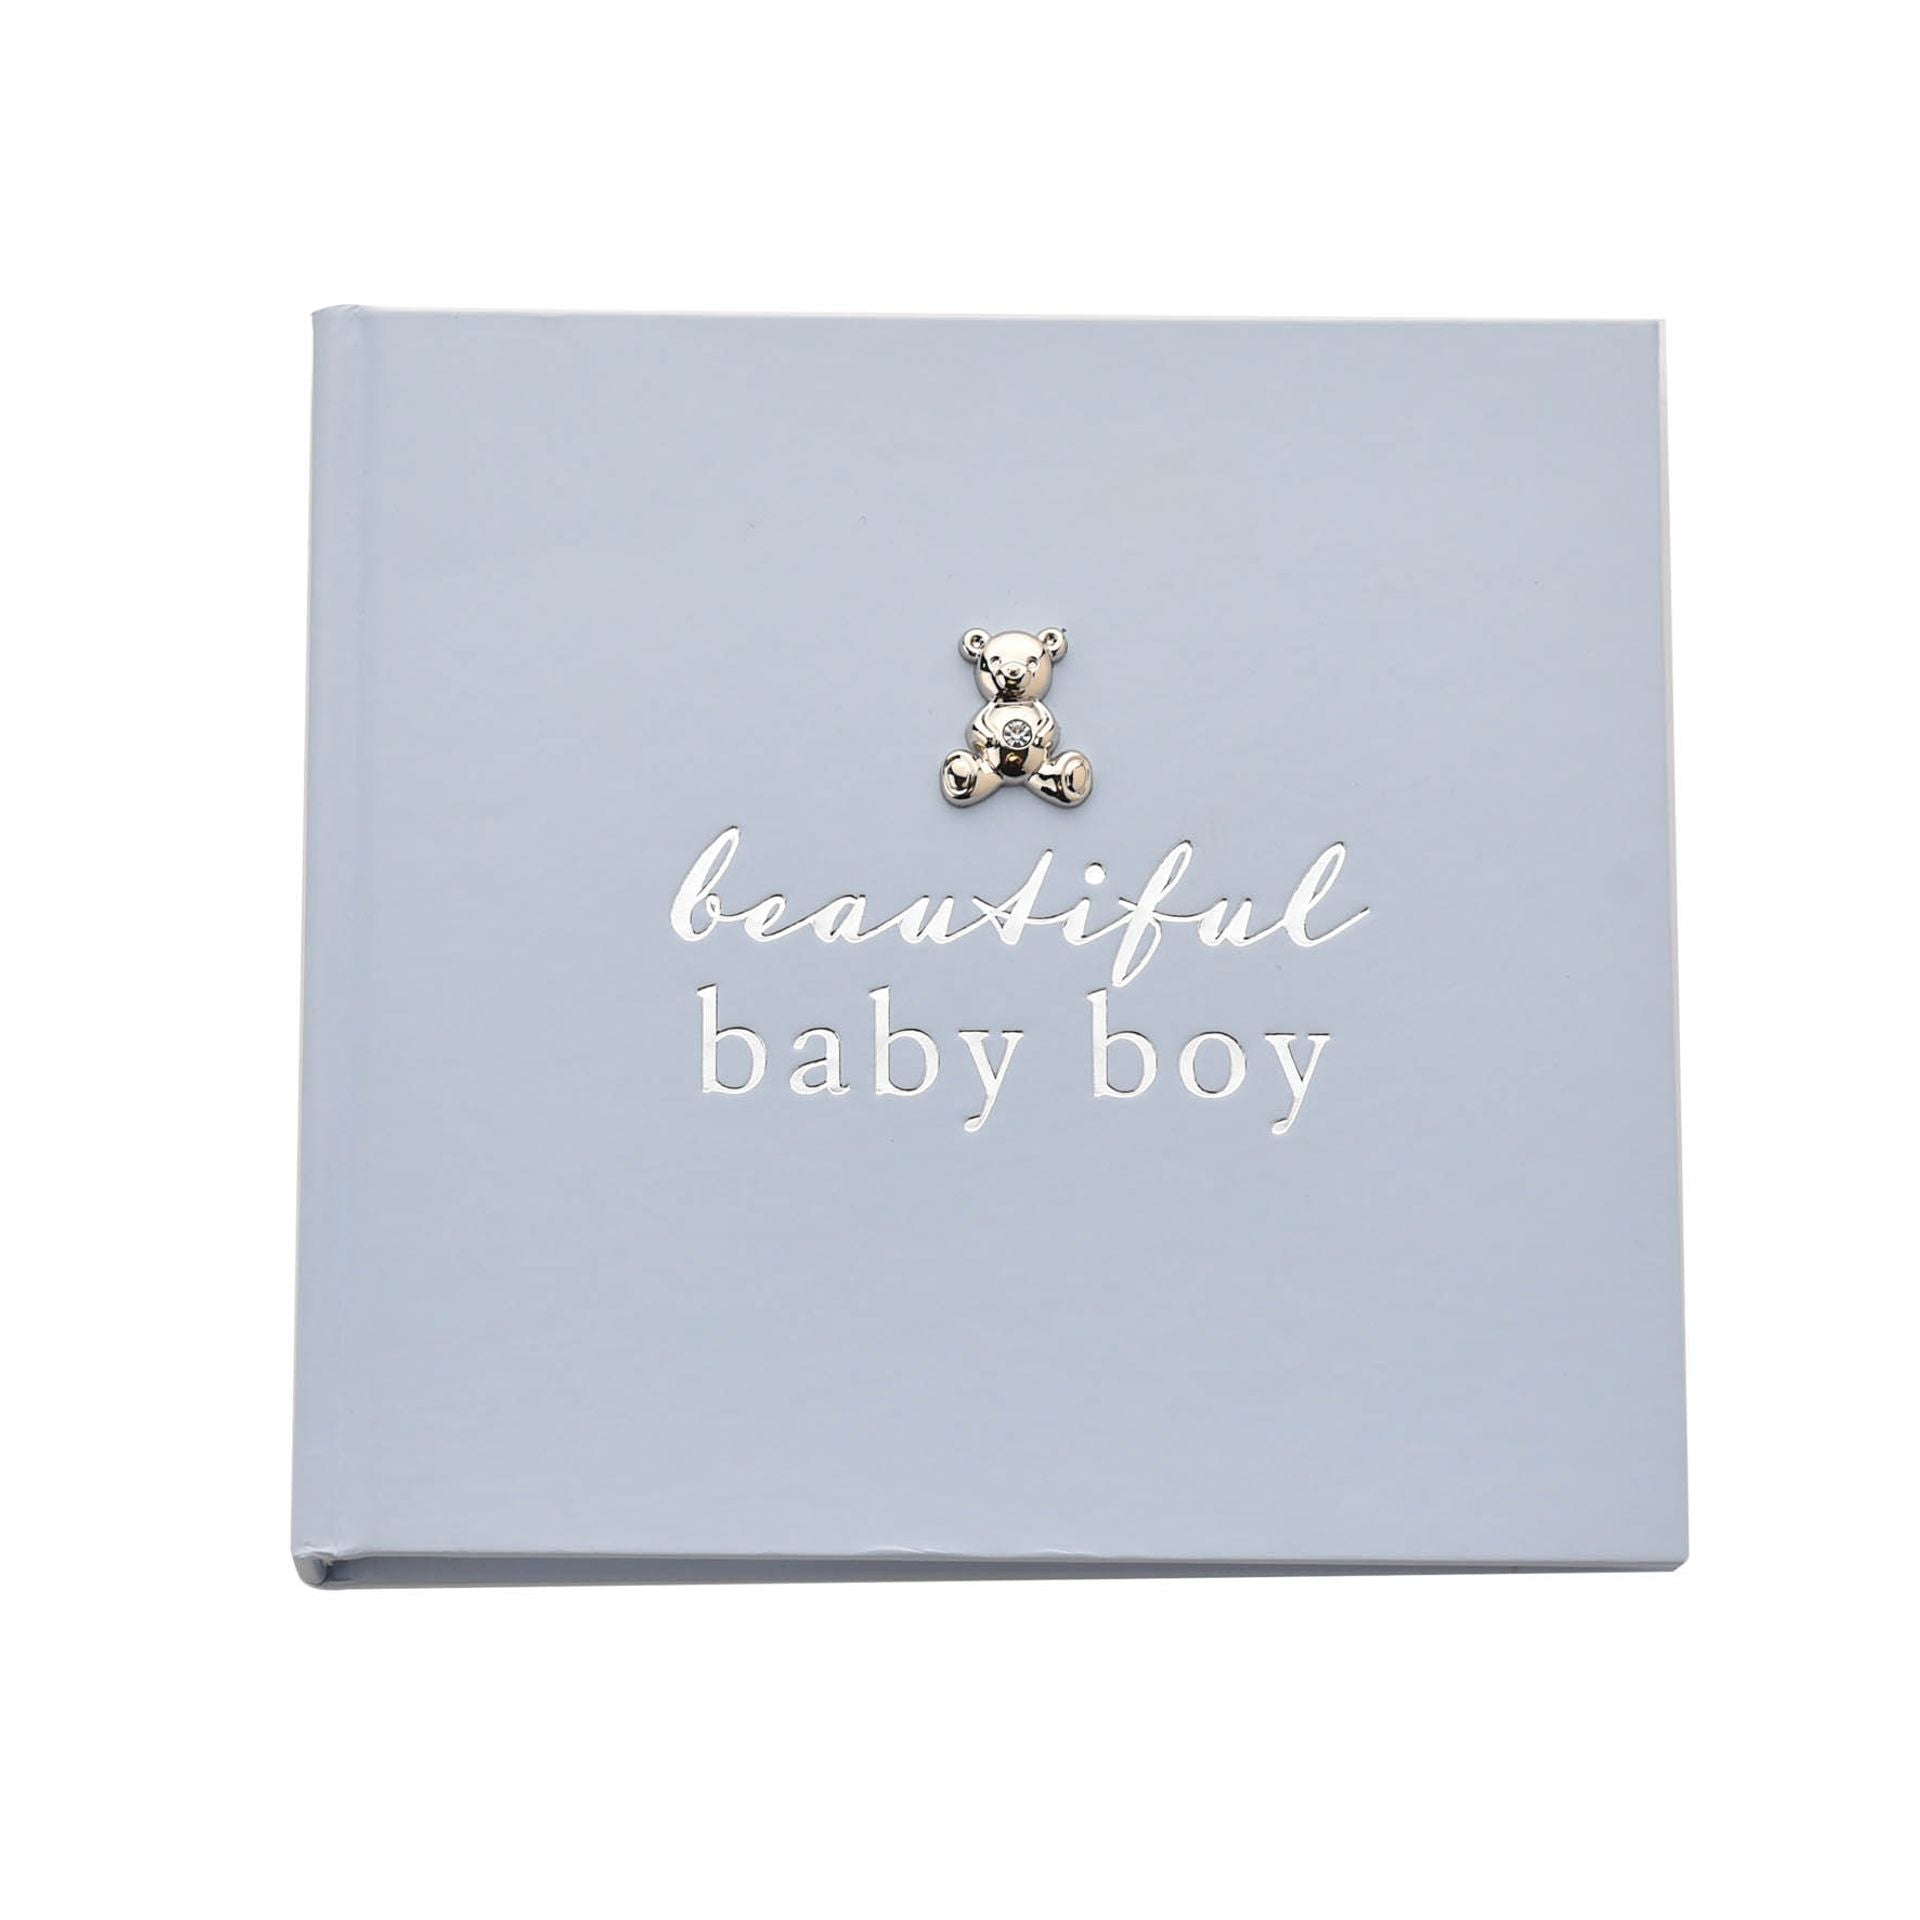 This adorable blue album allows parents to present photographs of their new born son with a personalised touch. The perfect gift for a newborn!